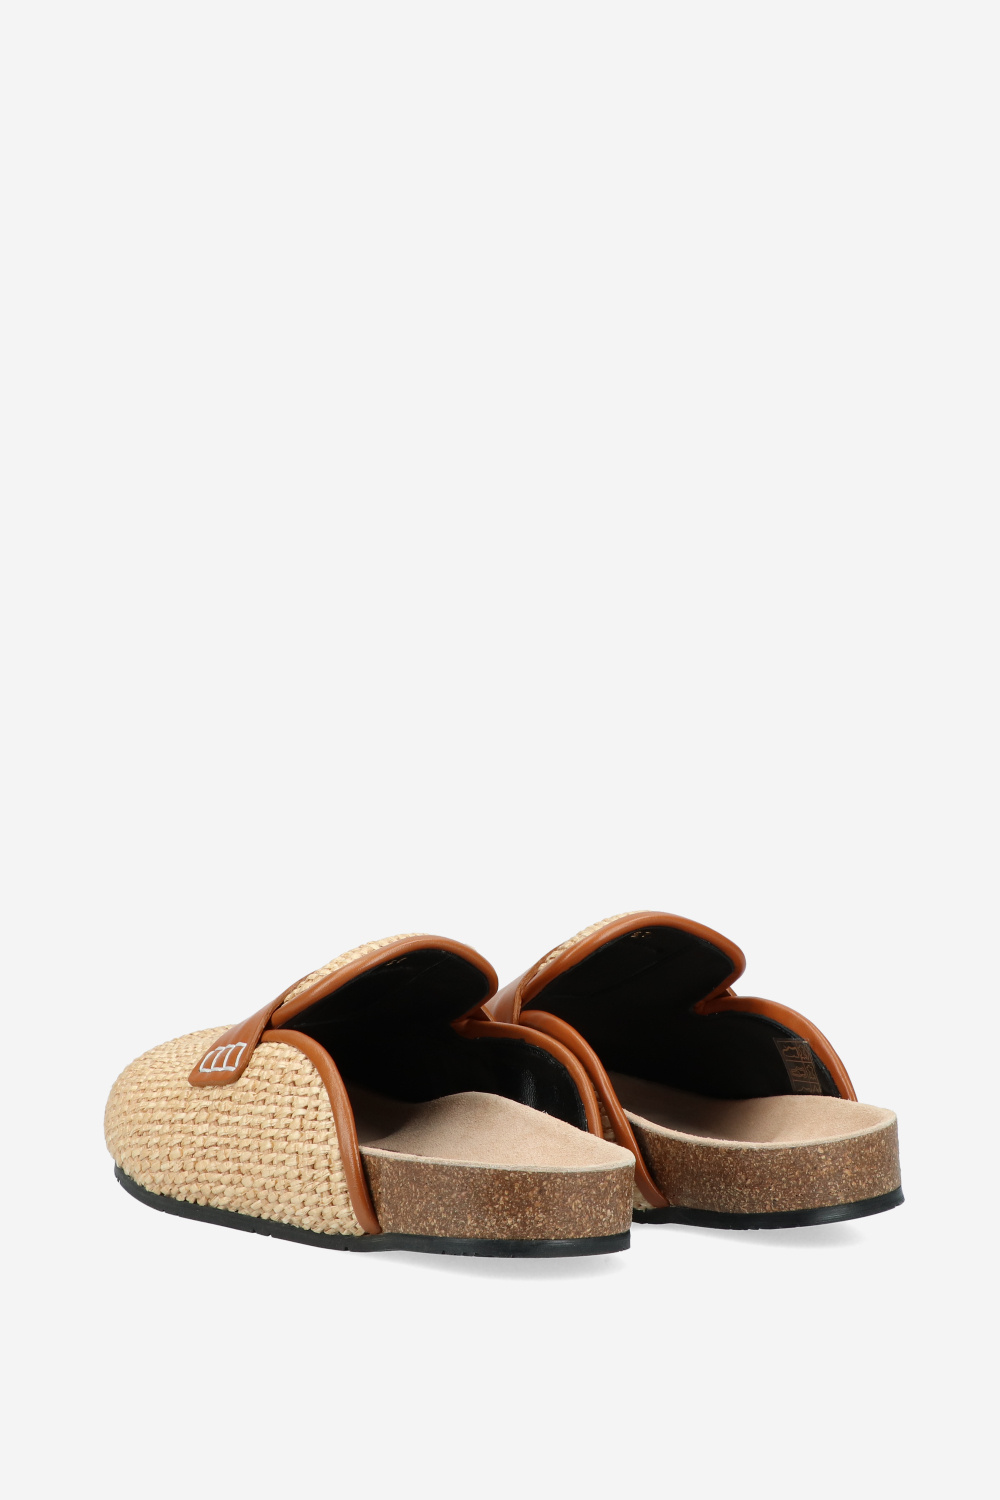 JW Anderson Loafers Brown